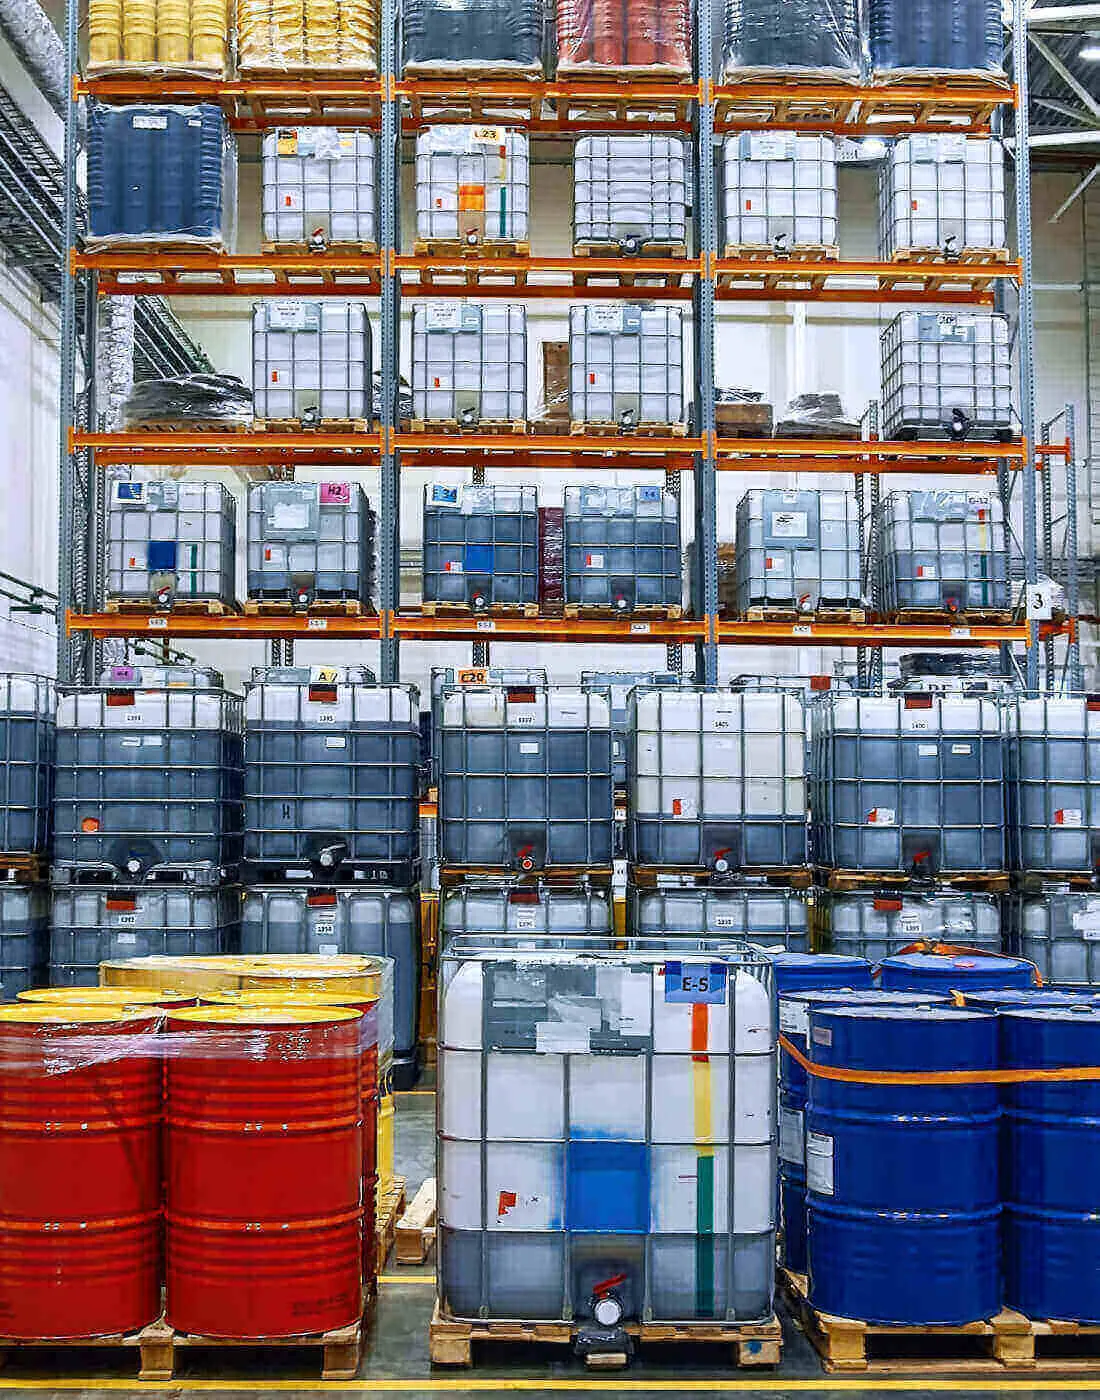 neatly stacked and packaged containers lined up on tall shelves in a warehouse